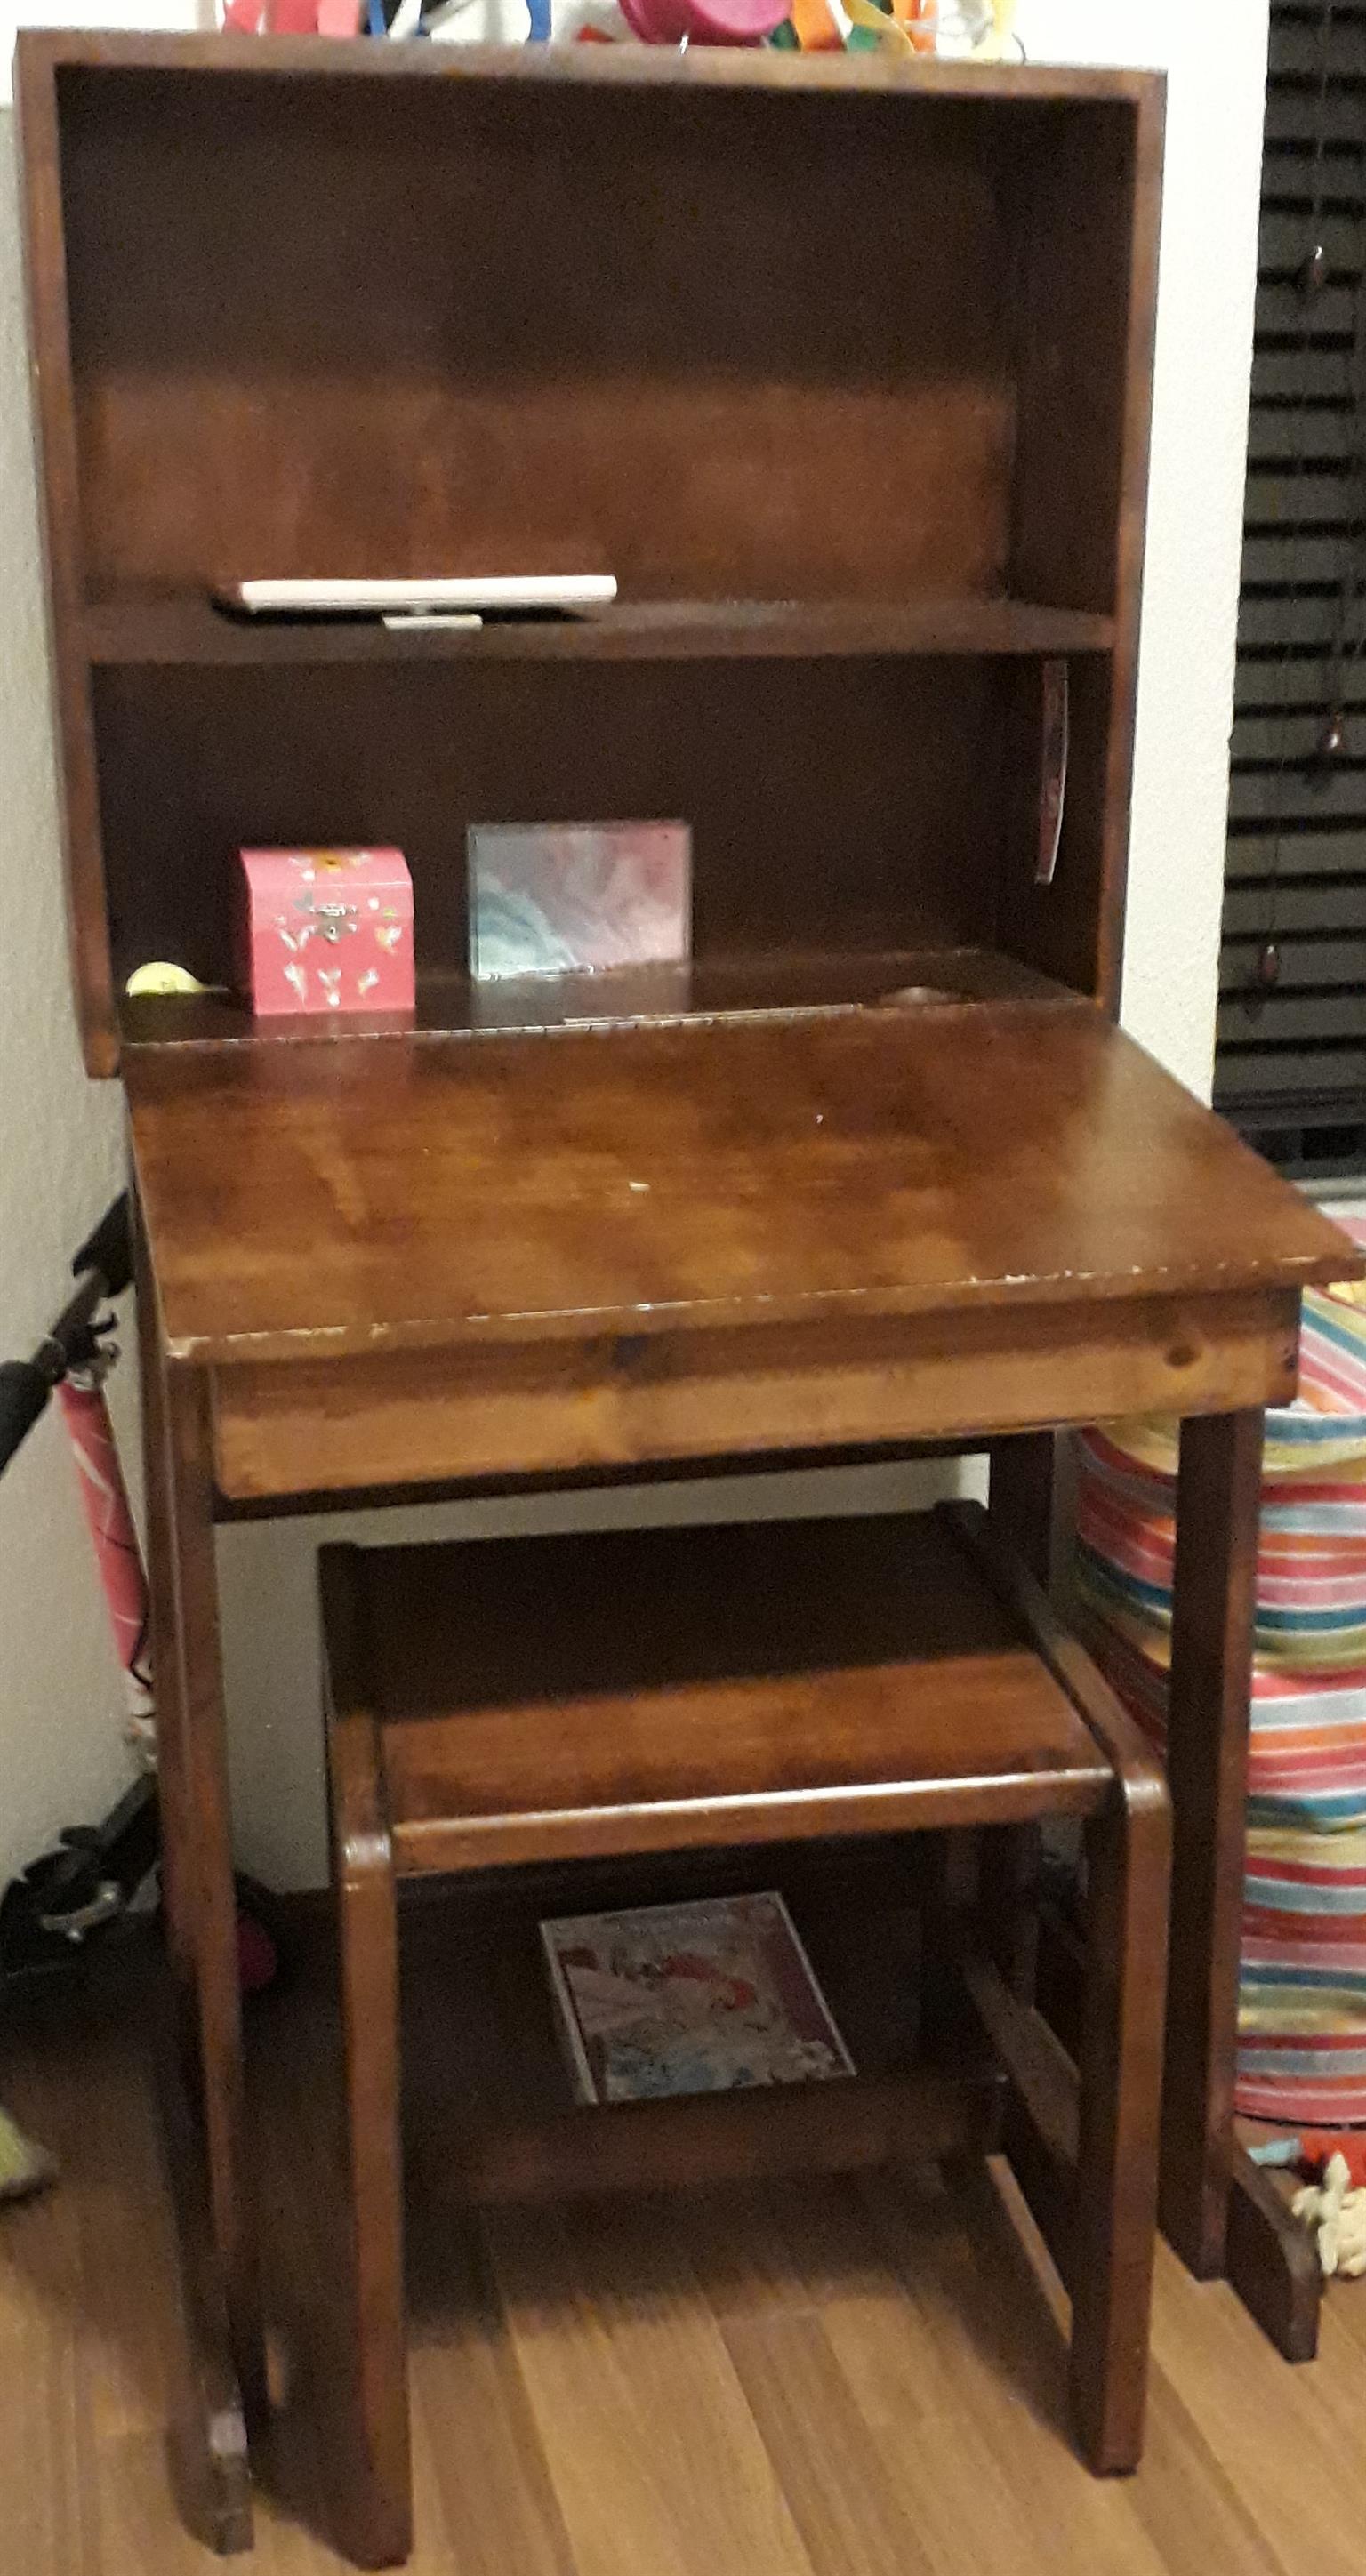 Old Style School Desk Built In Book Shelves And A Stool Junk Mail